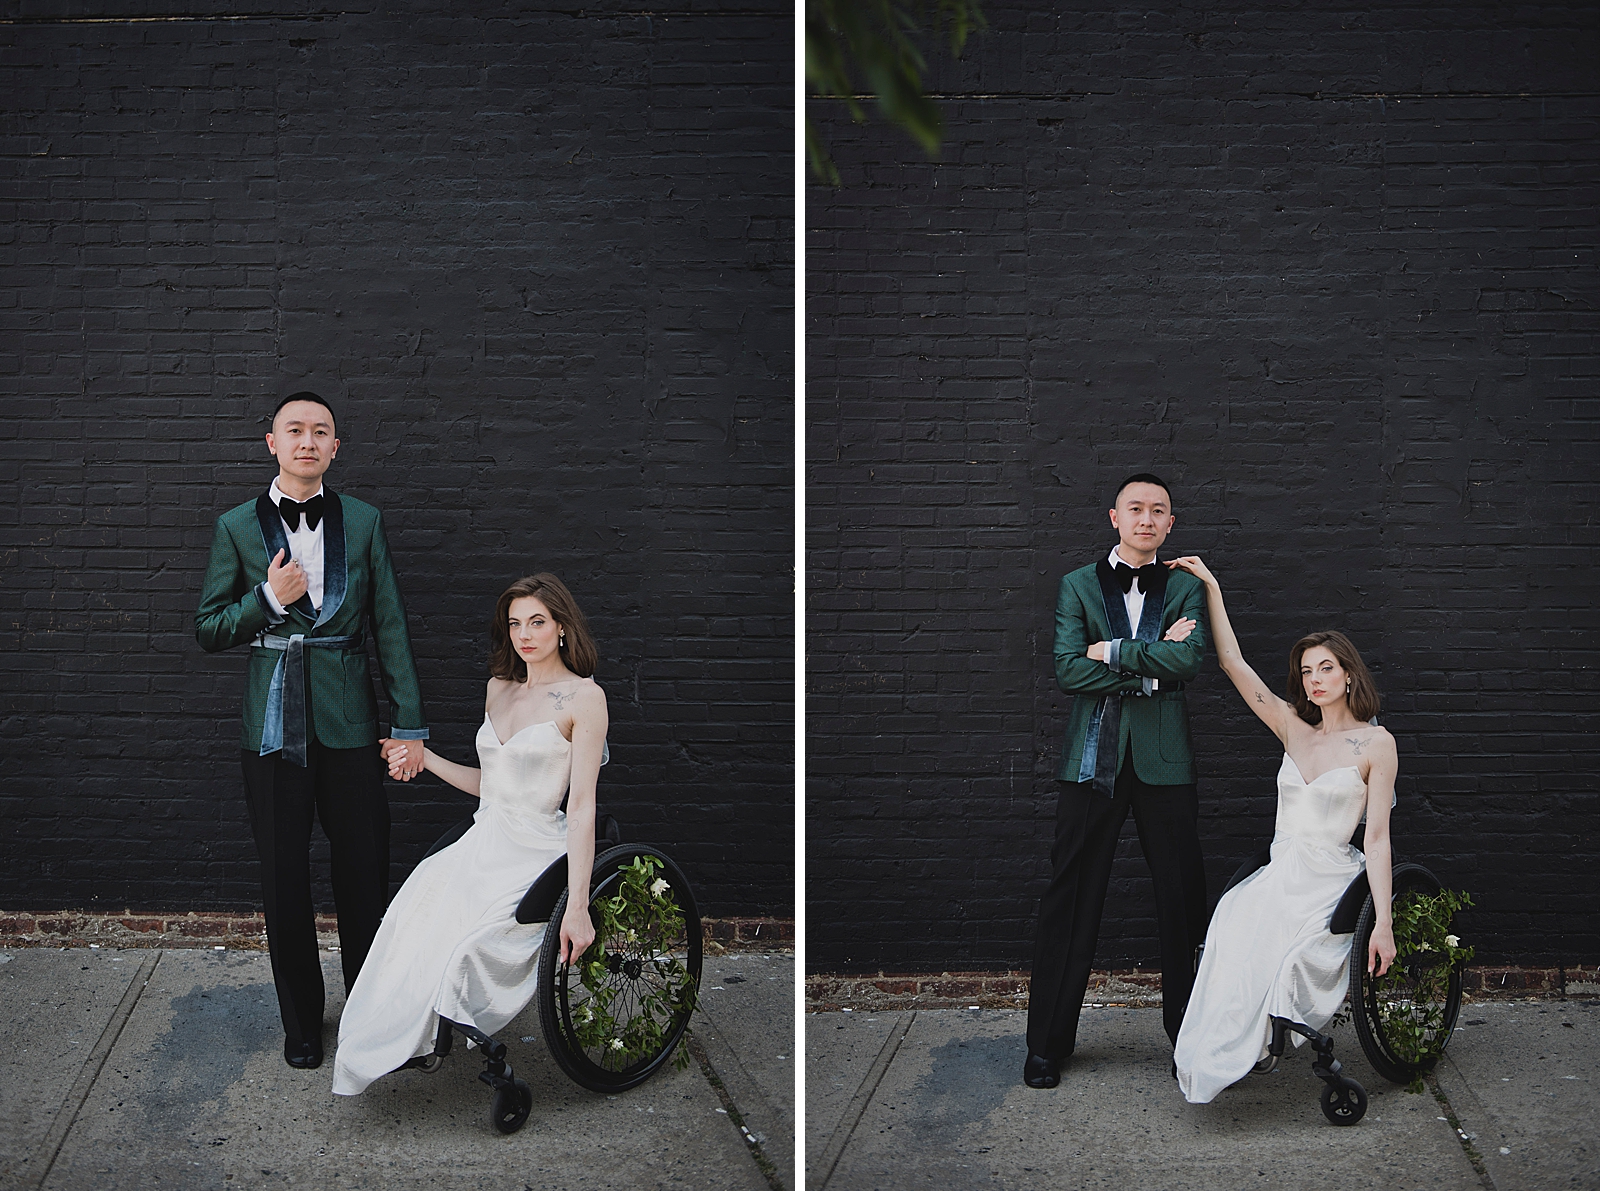 Left photo: Shot of the bride and groom holding hands in front of a black painted brick wall. 
Right photo: Shot of the bride and groom posing in front of a black painted brick wall. 